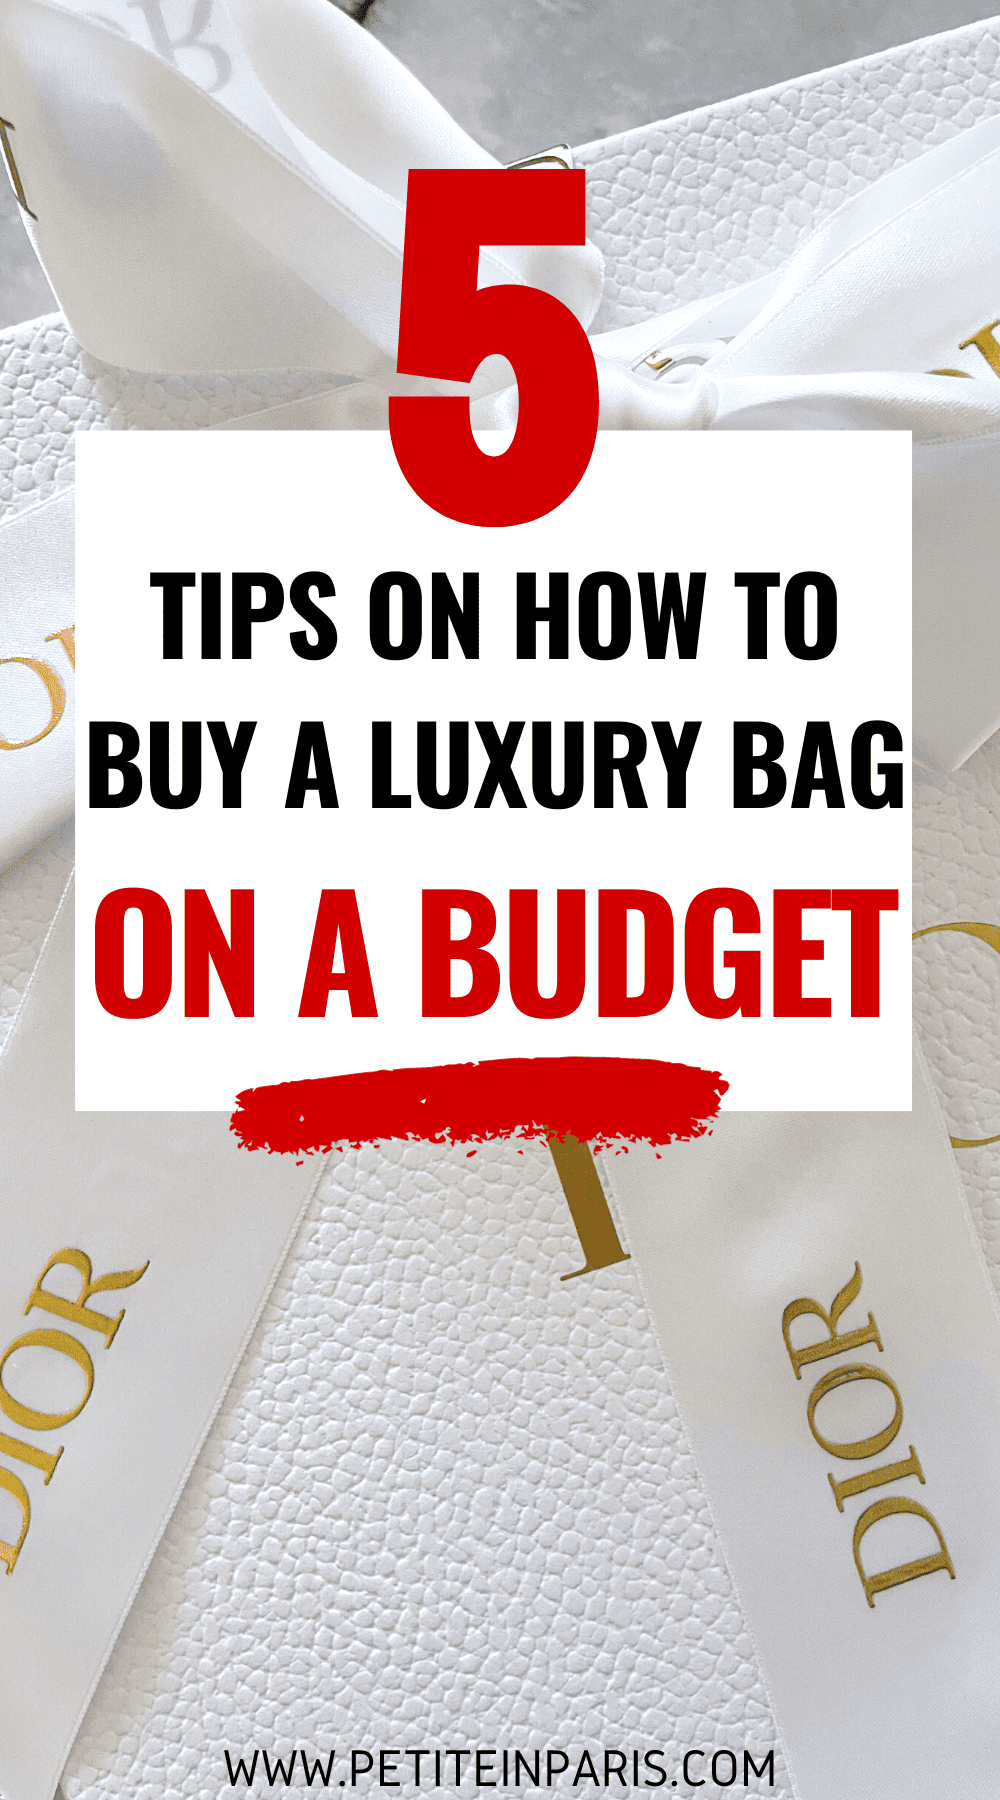 HOW TO BUY A LUXURY BAG ON A BUDGET